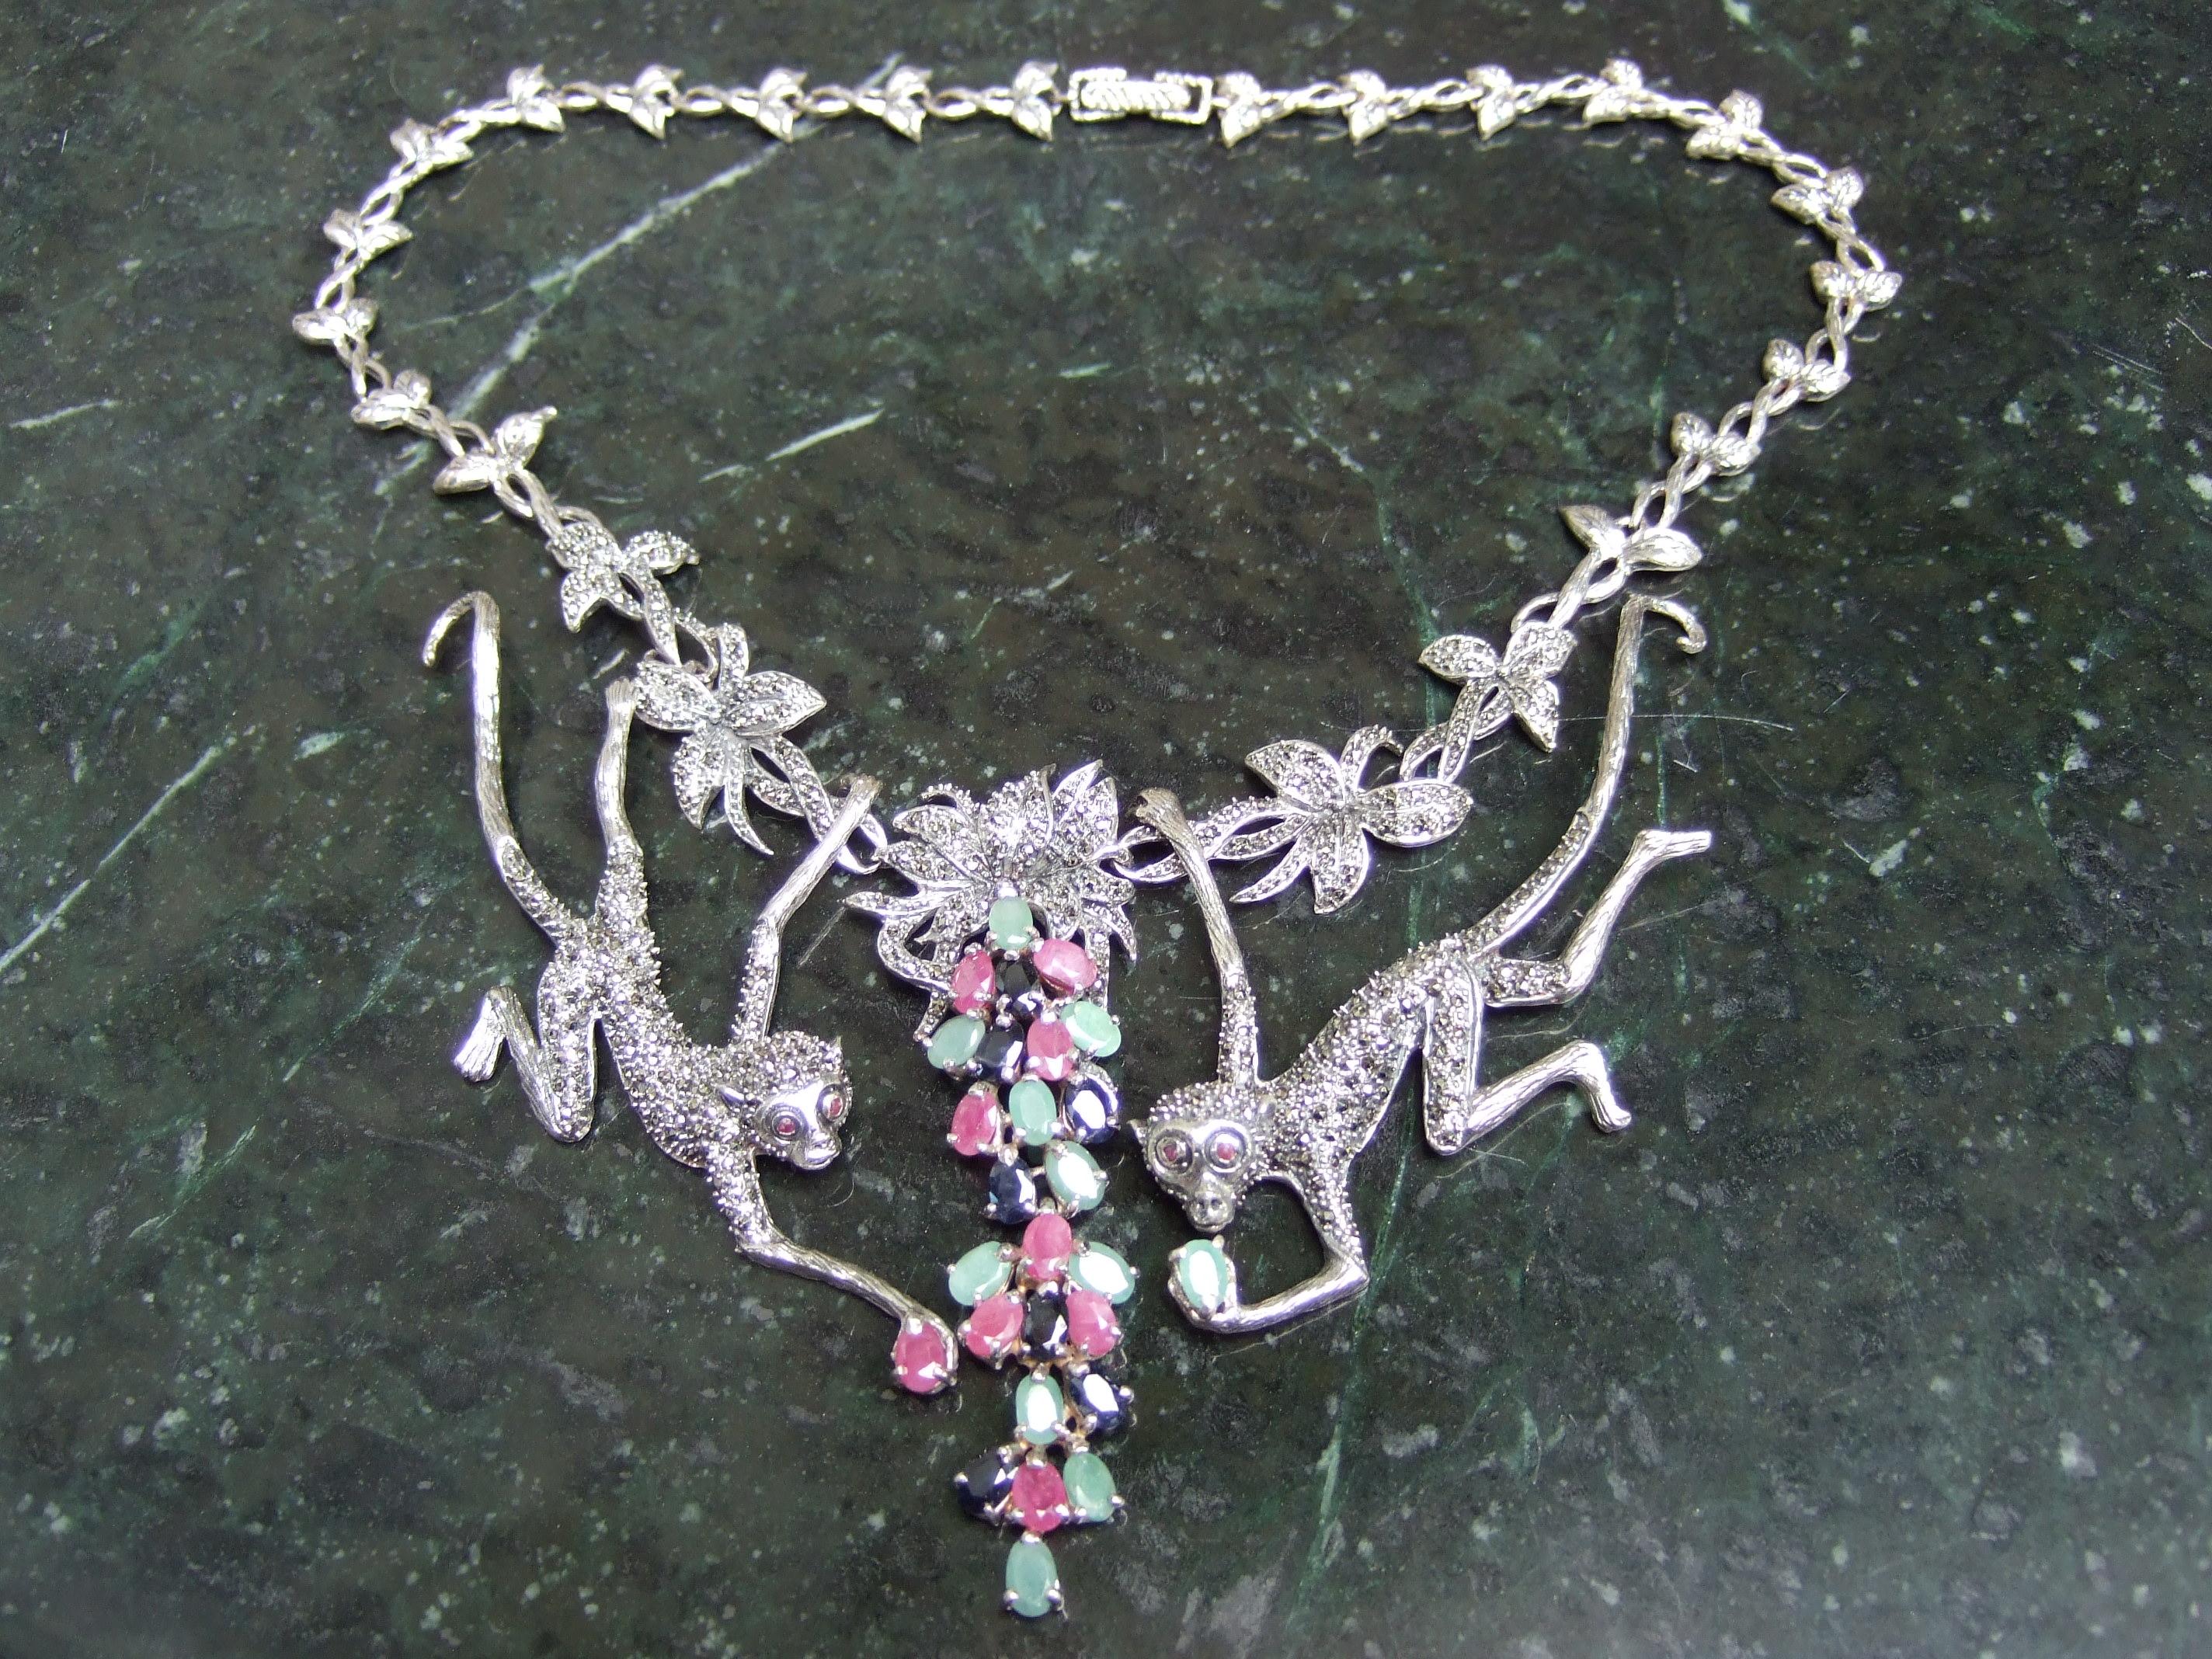 Opulent jewel encrusted sterling silver articulated monkey choker necklace 21st c 
The exquisite avant-garde necklace is designed with a pair of stylized monkey's embellished with glittering marcasite crystals. Accented with semi-precious prong set